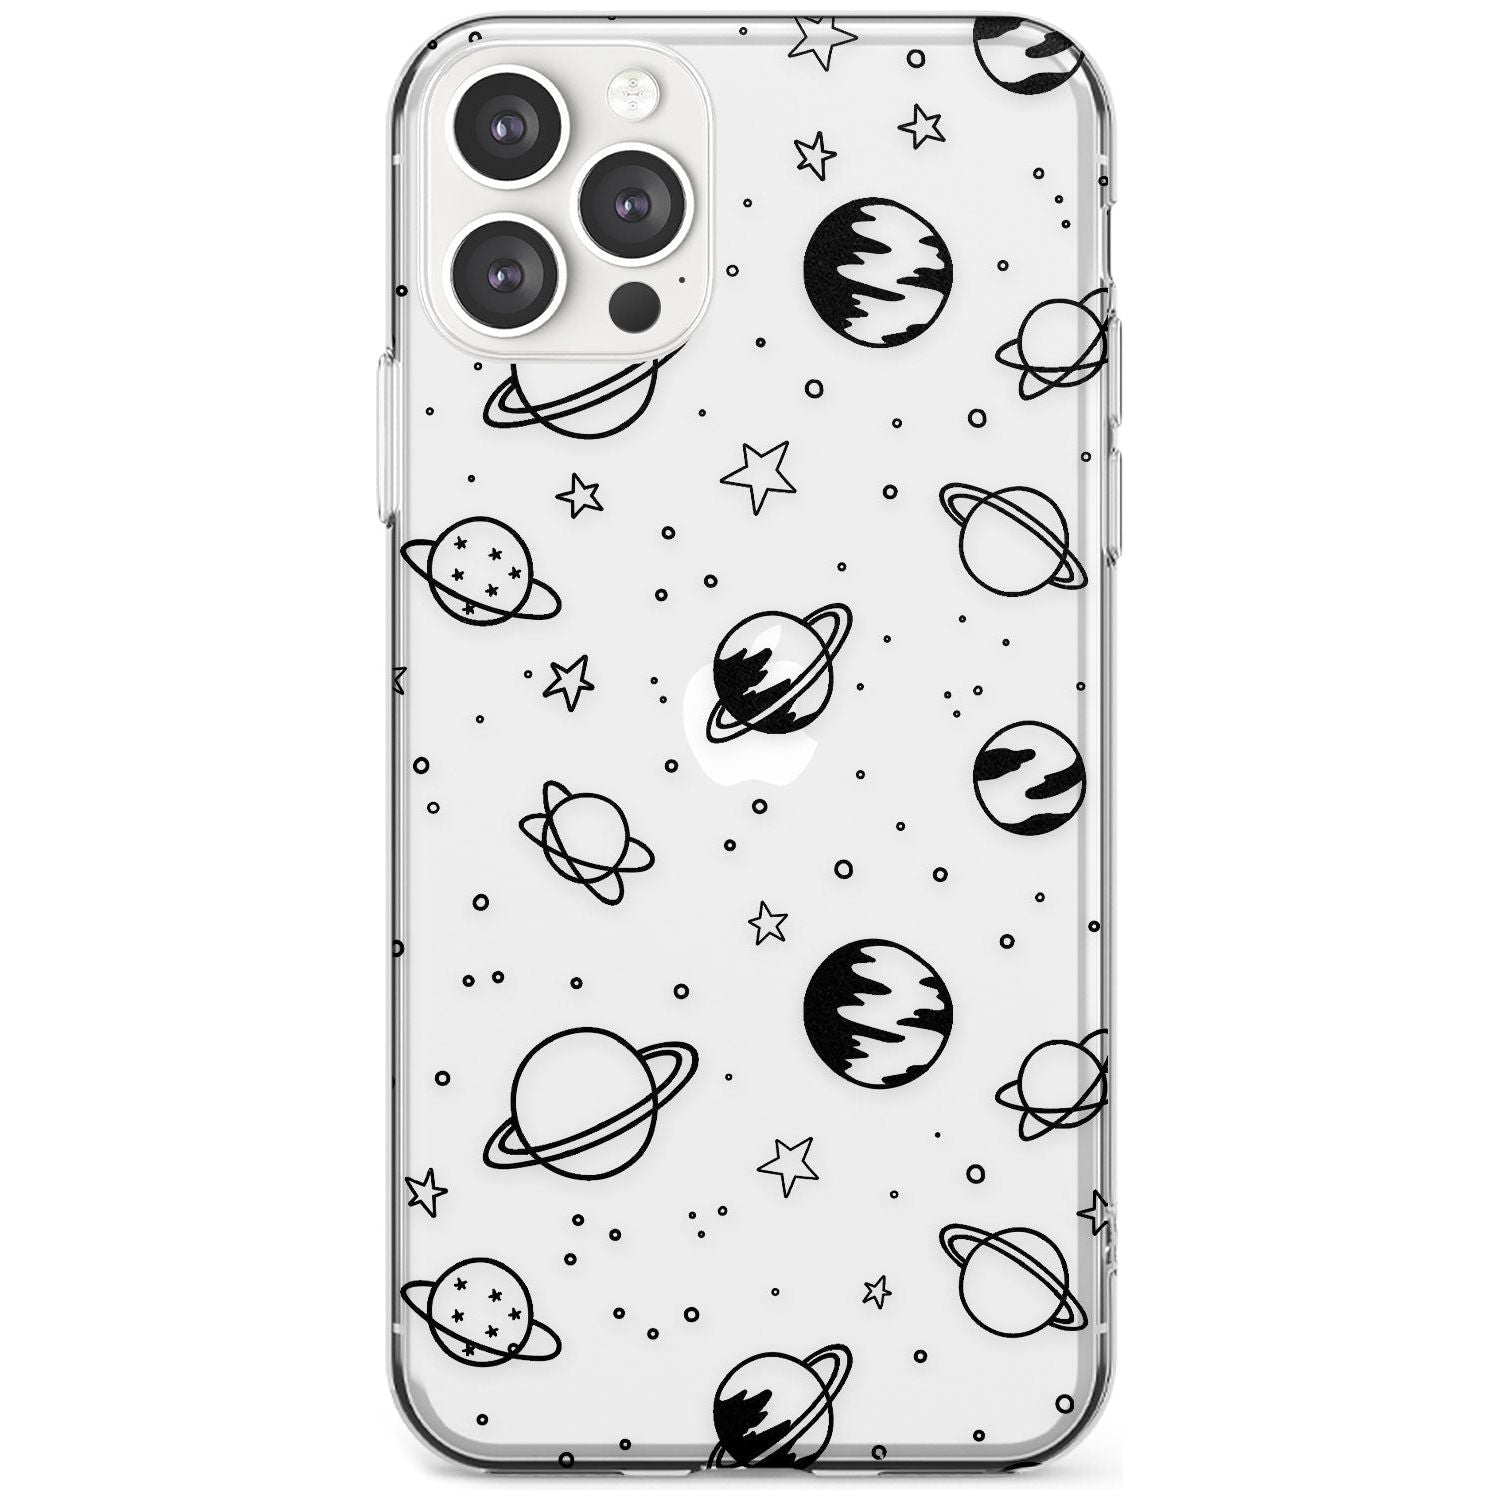 Outer Space Outlines: Black on Clear Black Impact Phone Case for iPhone 11 Pro Max